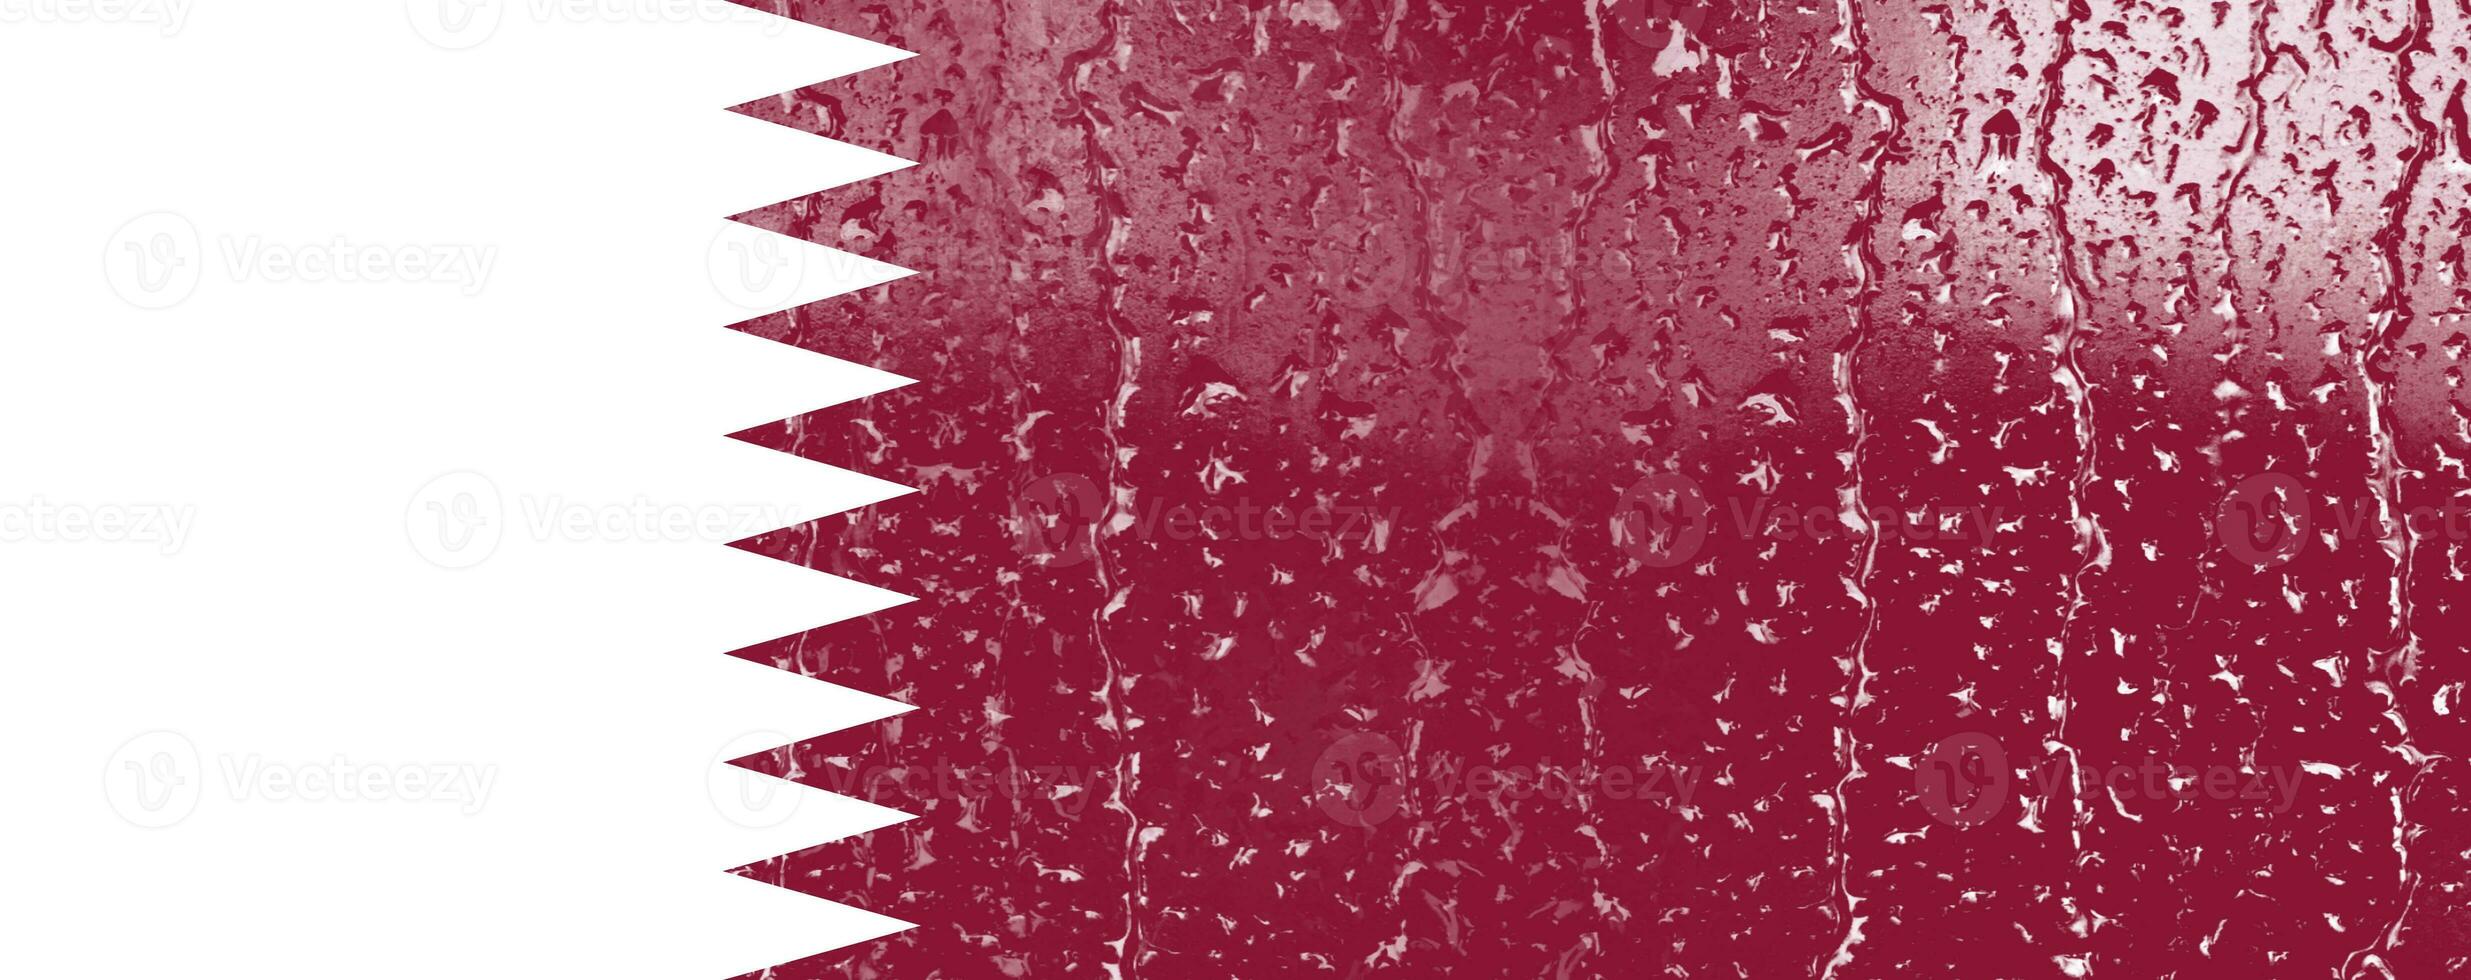 3D Flag of Qatar on a glass with water drop background. photo